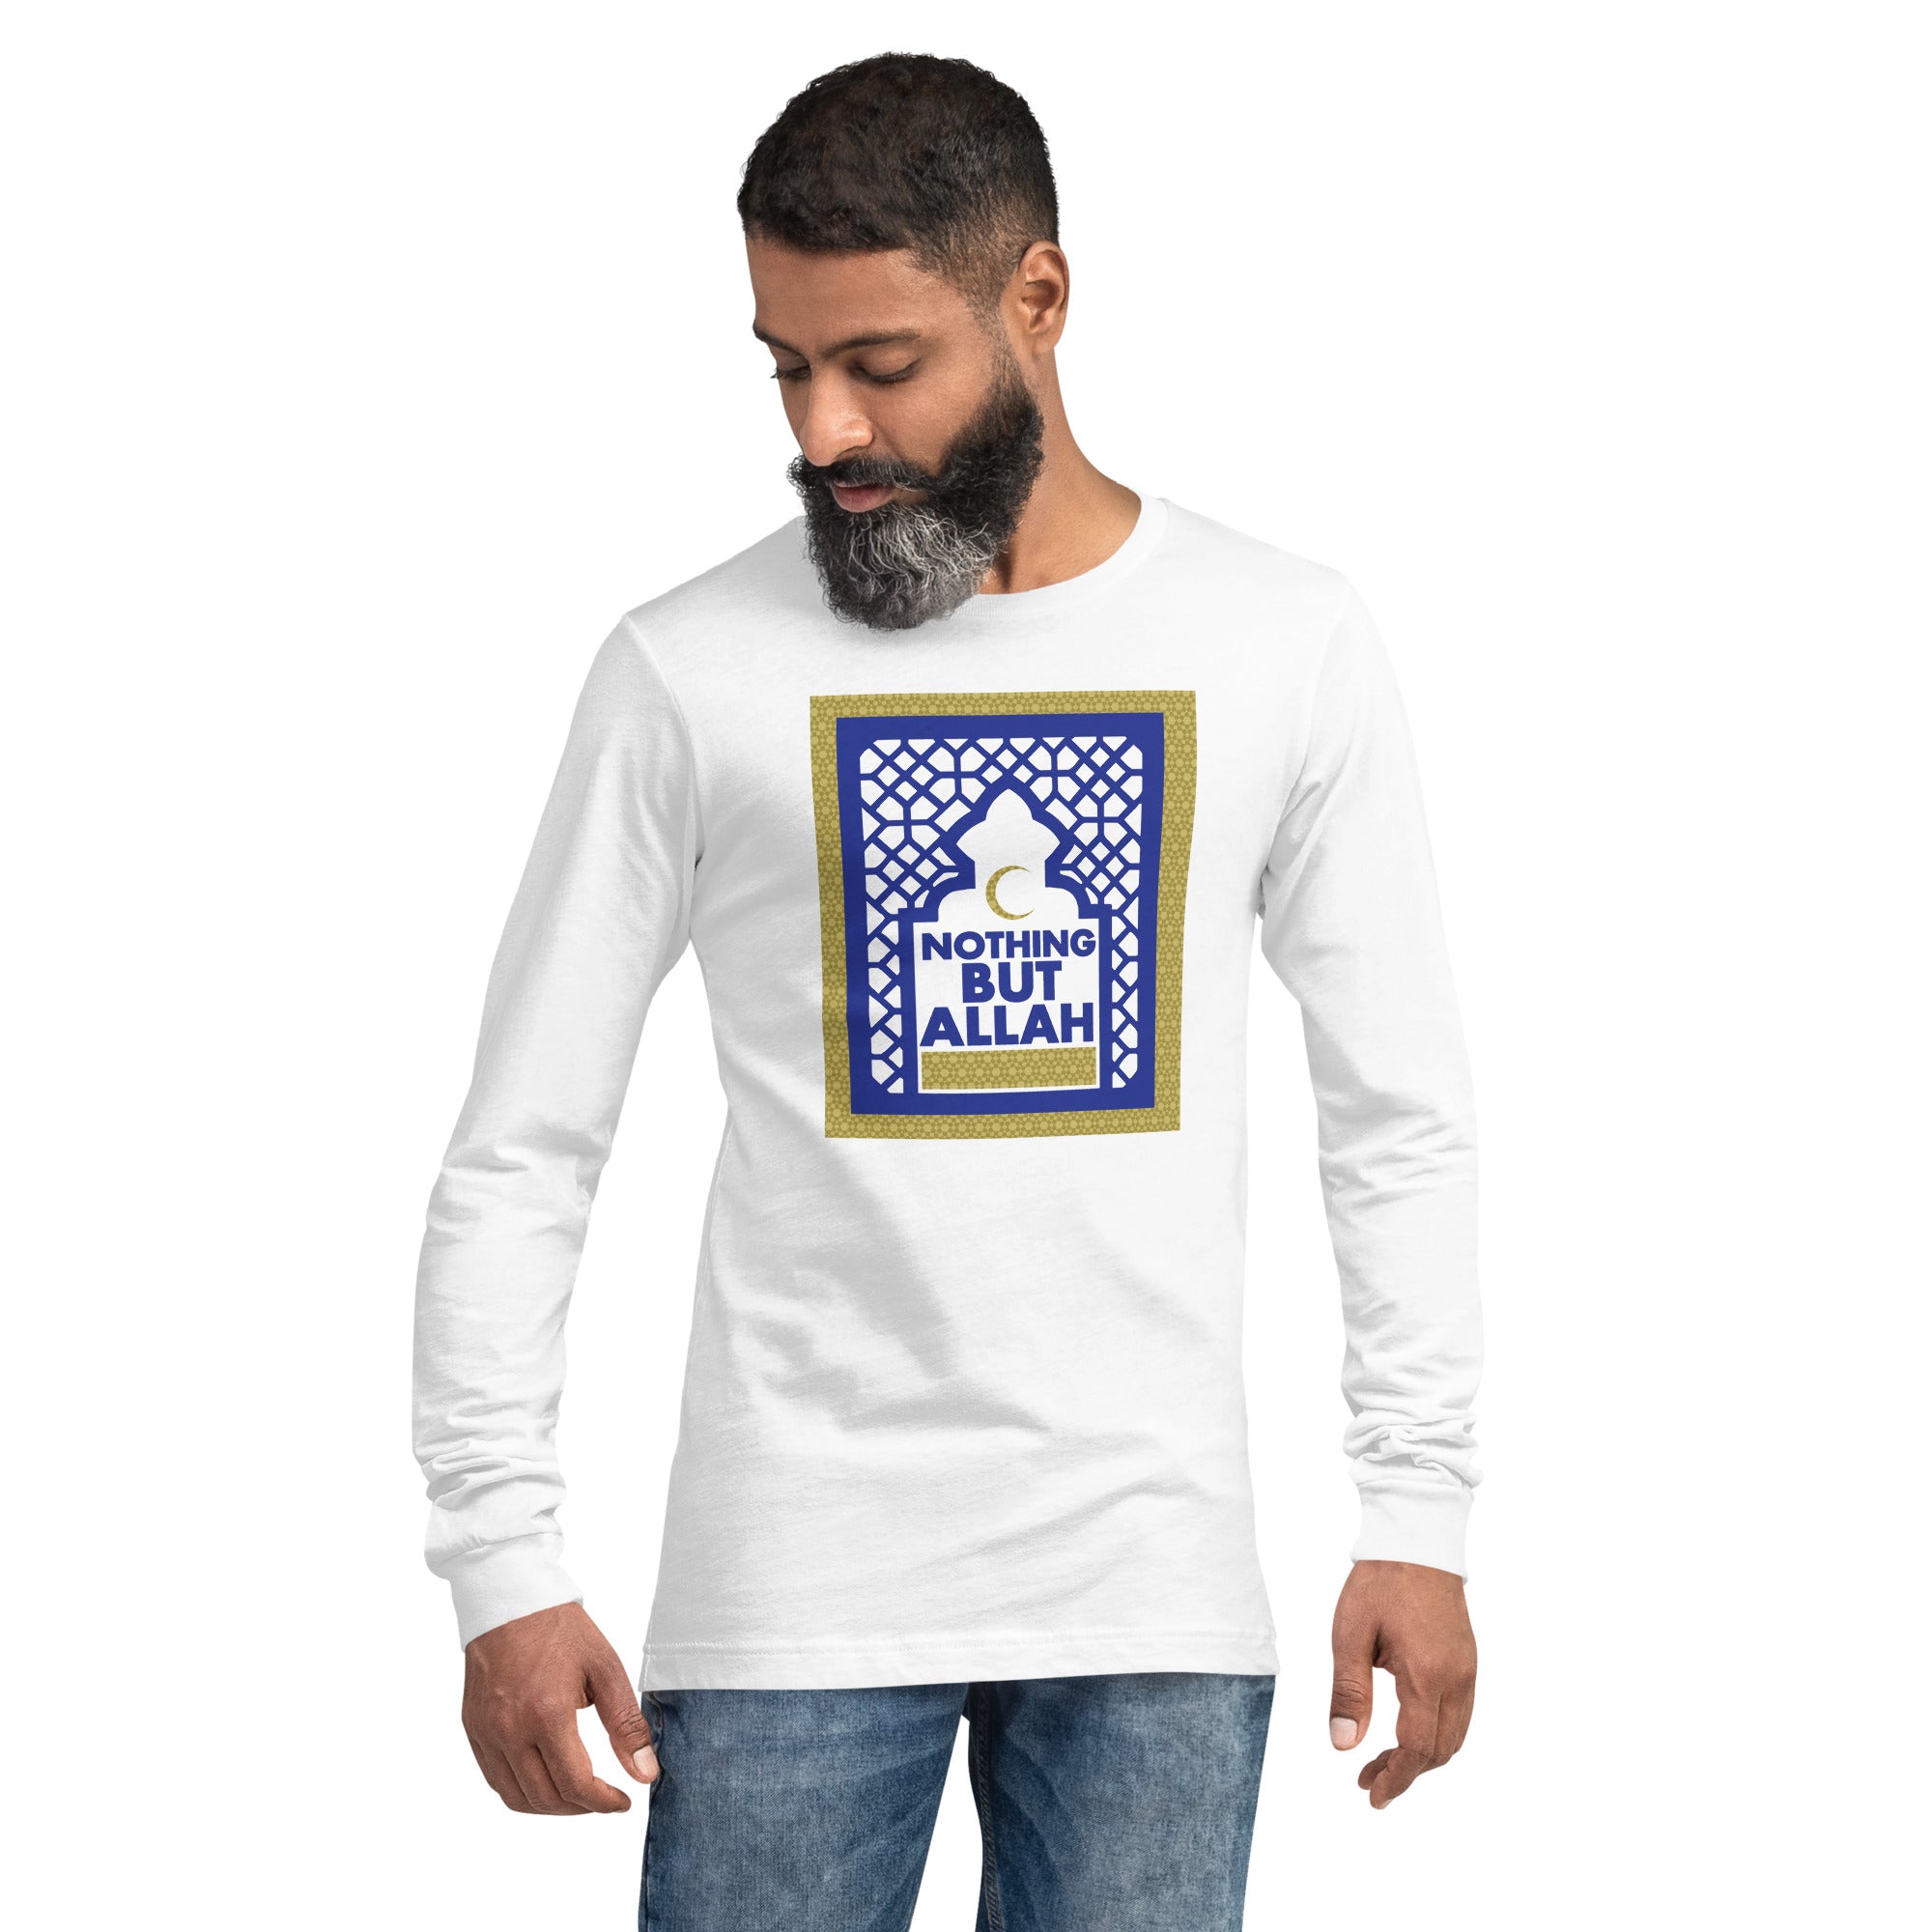 Nothing But Allah Arch Unisex Long Sleeve Tee